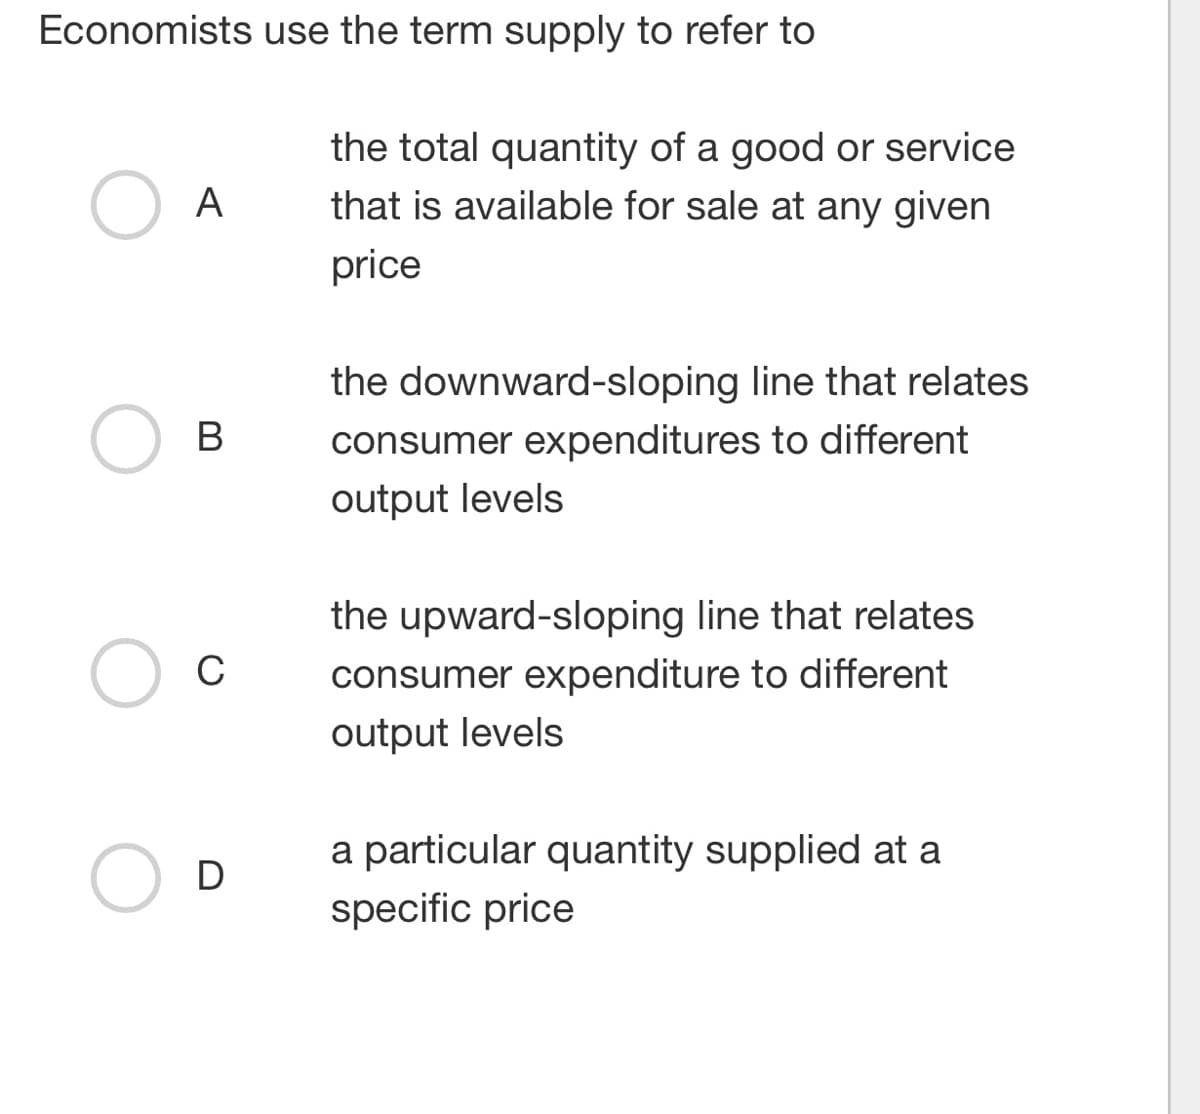 Economists use the term supply to refer to
A
B
C
D
the total quantity of a good or service
that is available for sale at any given
price
the downward-sloping line that relates
consumer expenditures to different
output levels
the upward-sloping line that relates
consumer expenditure to different
output levels
a particular quantity supplied at a
specific price